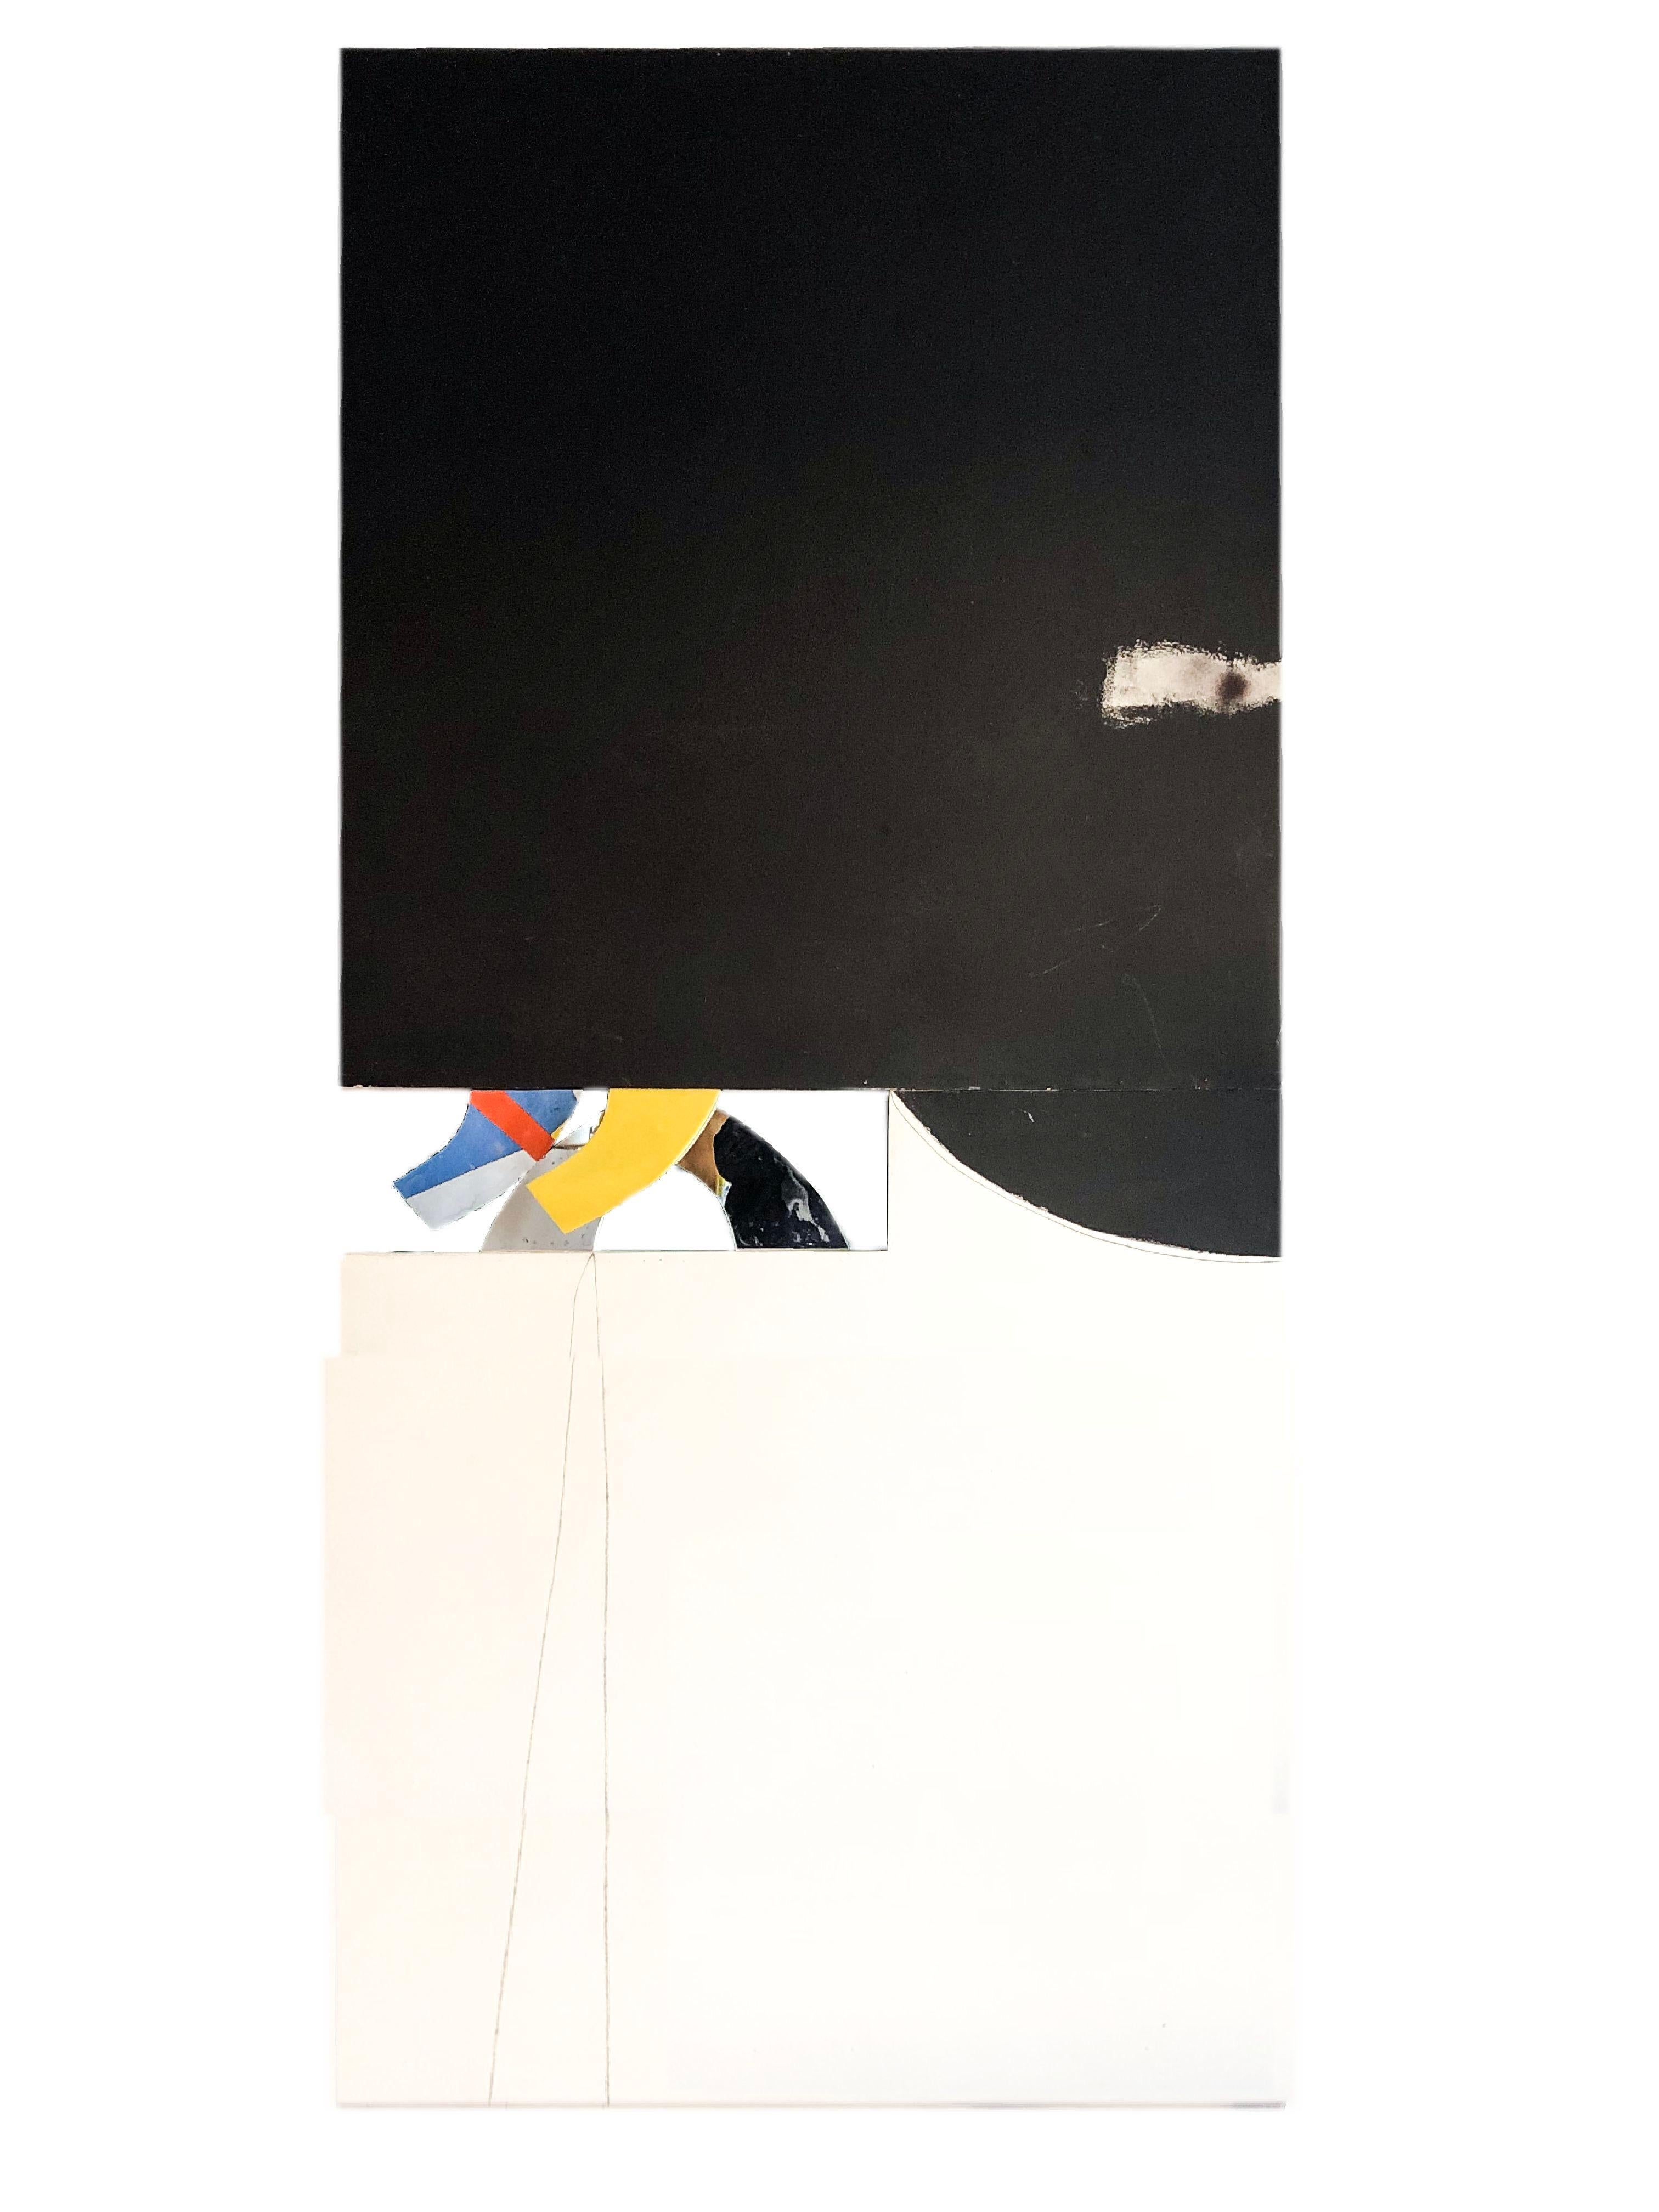 Abstract Minimalist Diptych Black & White Panel Painting Erik Atkinson Icon 1971. Acrylic on board with mirror and plexi glass in 2 pieces, overall 100 x 48.25 inches, signed, titled, and dated on reverse.

Eric Atkinson is a major Canadian abstract